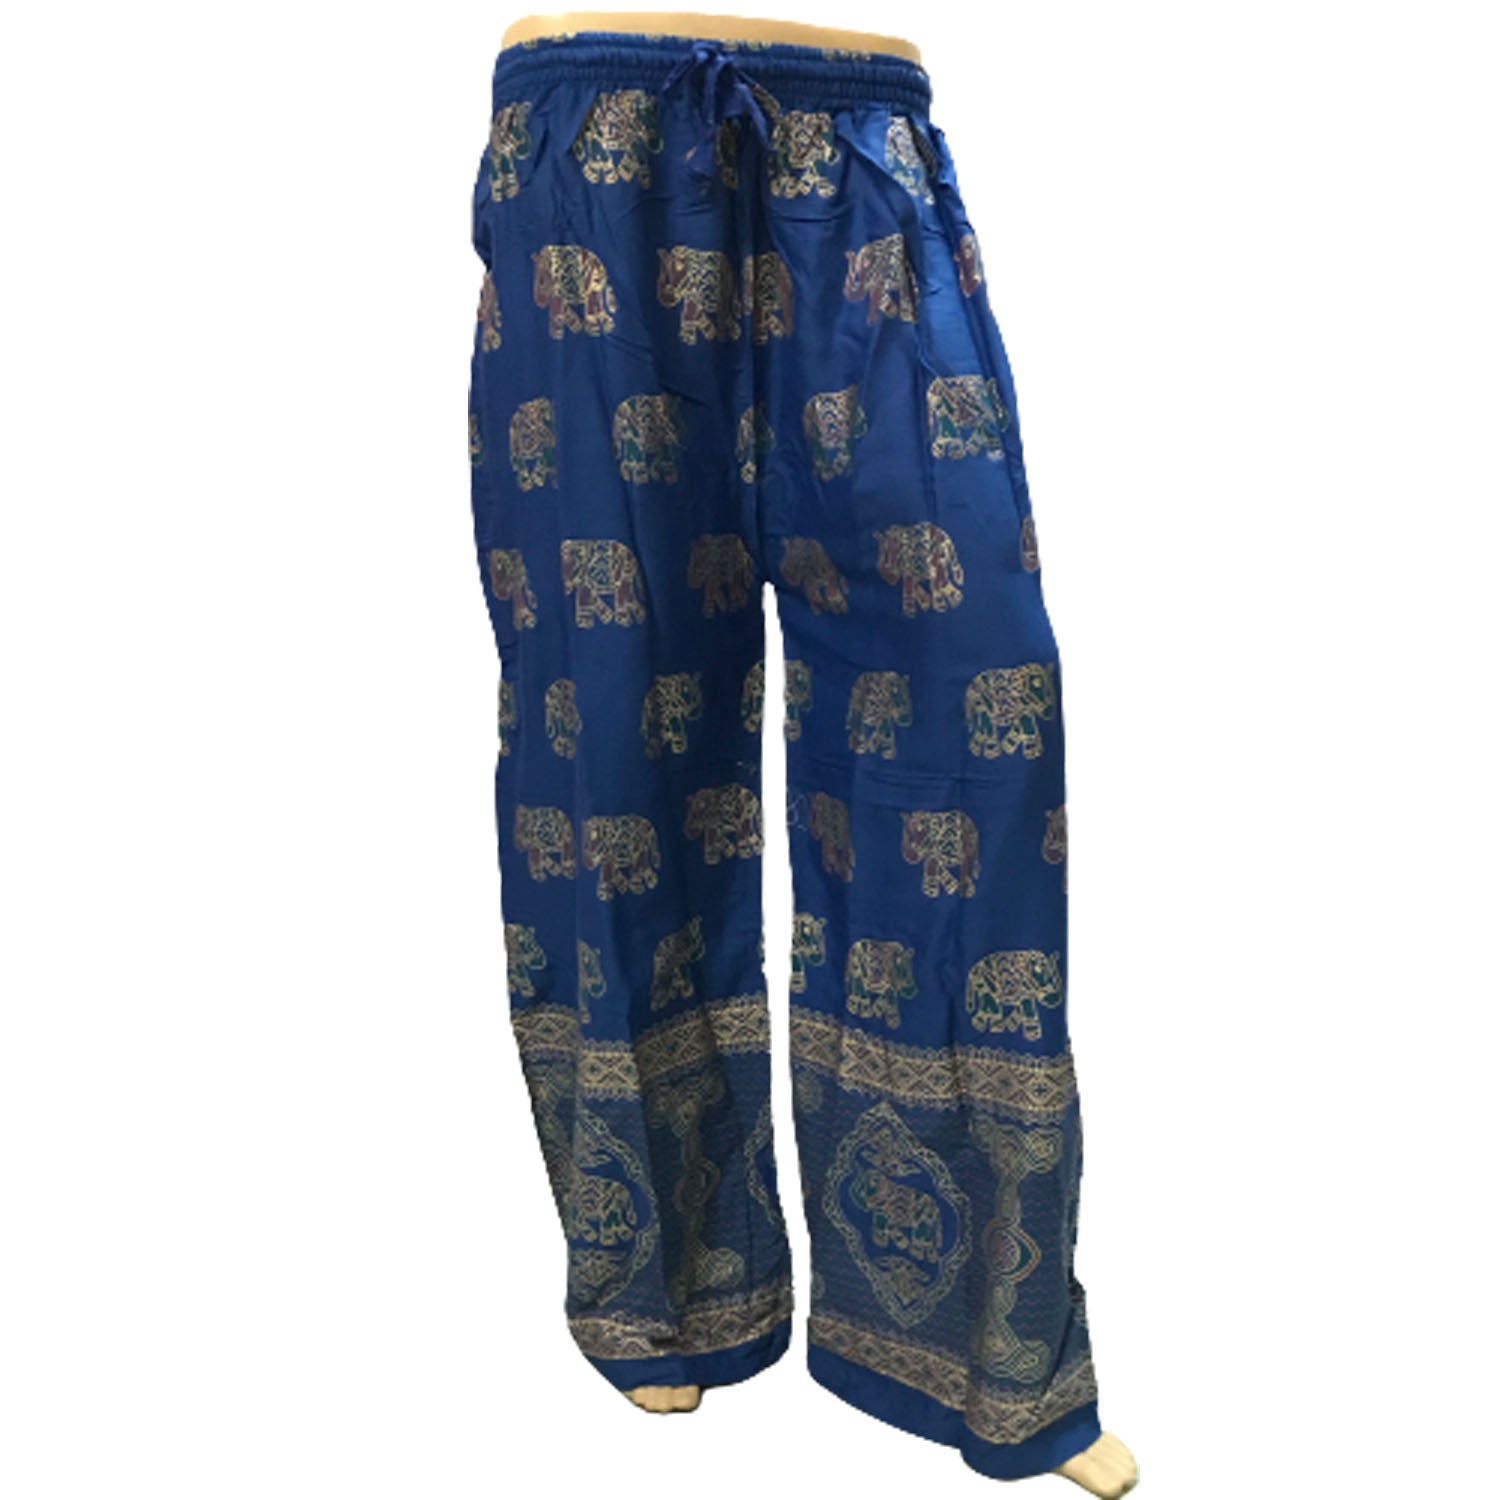 Ganesha Handicrafts Indian Style Elephant Print Solid Colour Loose Trousers, Trousers, loose Trousers, Colour Trousers, Print Trousers, Elephant Print Trousers, Indian Style Trousers, Indian Style Print Trousers, Ink Blue Trousers